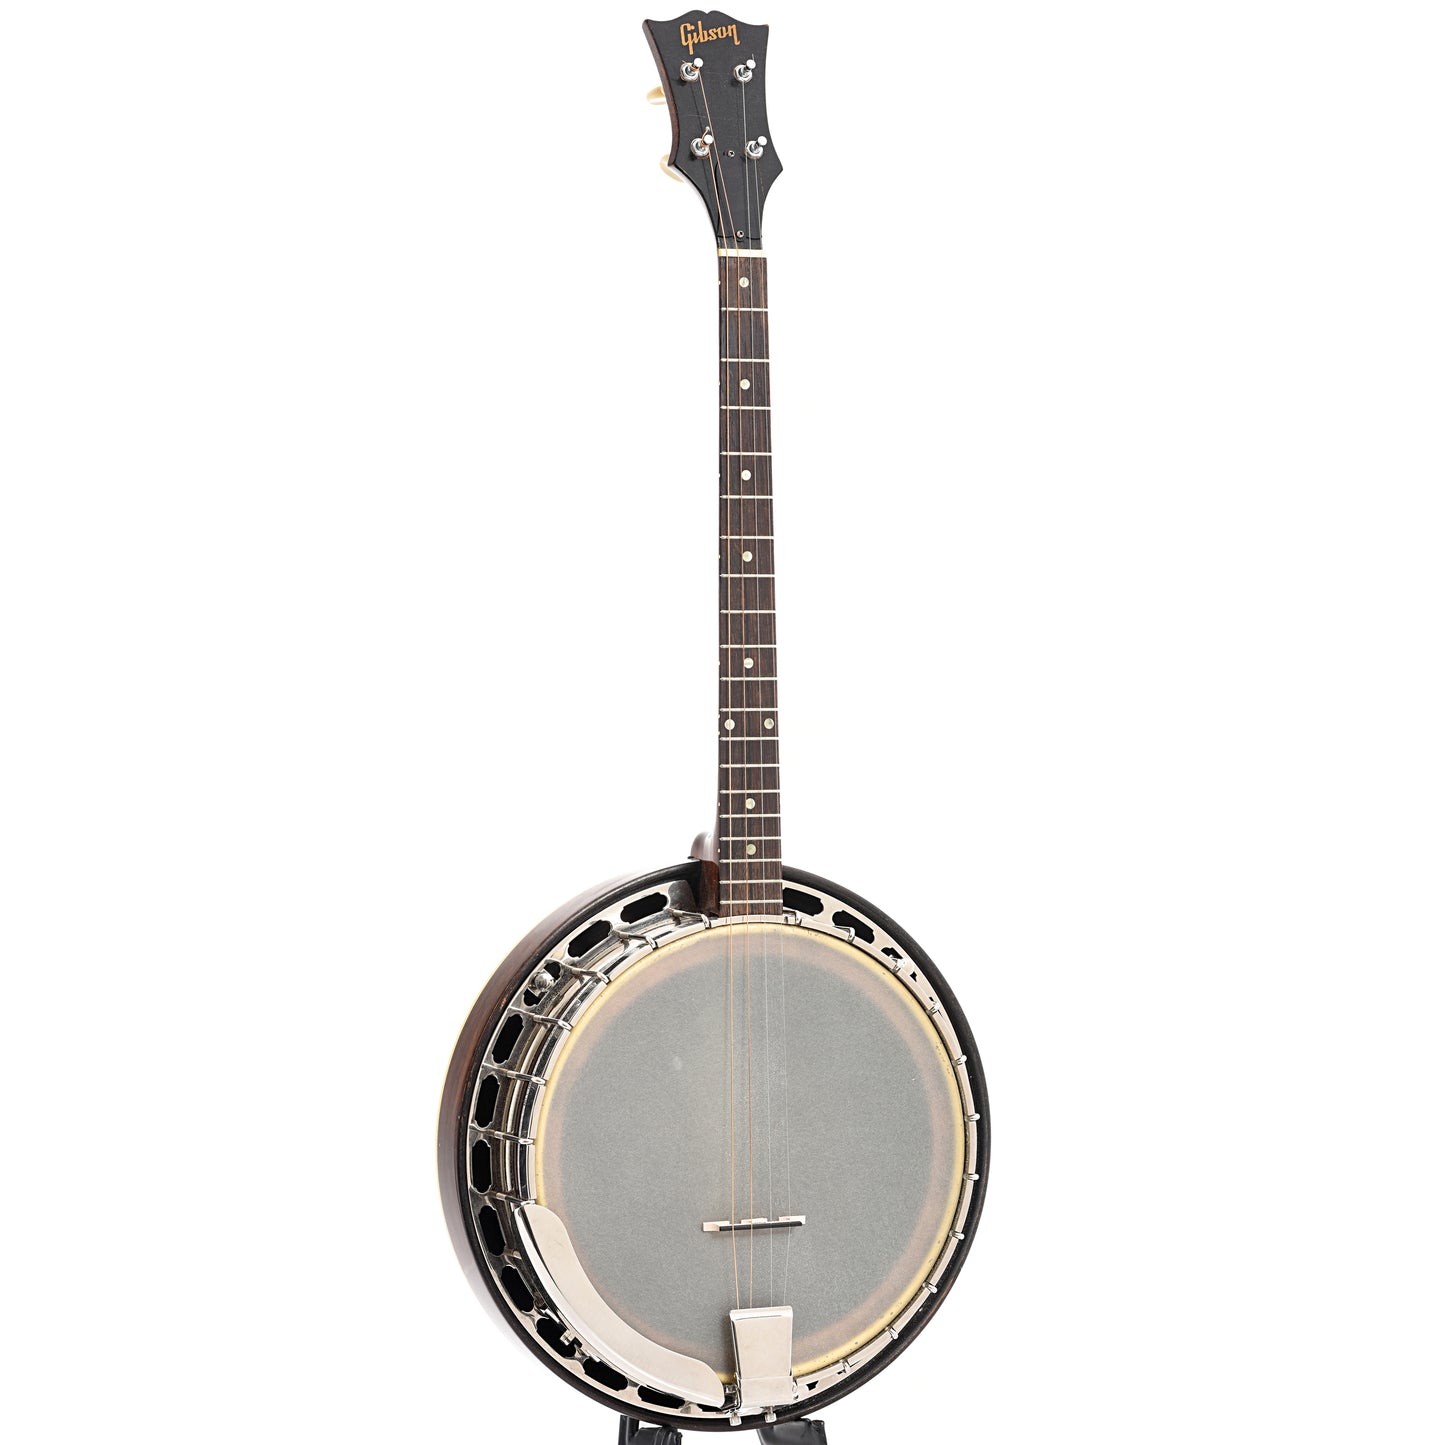 Full front and side of Gibson TB-100 Tenor Banjo (1956)